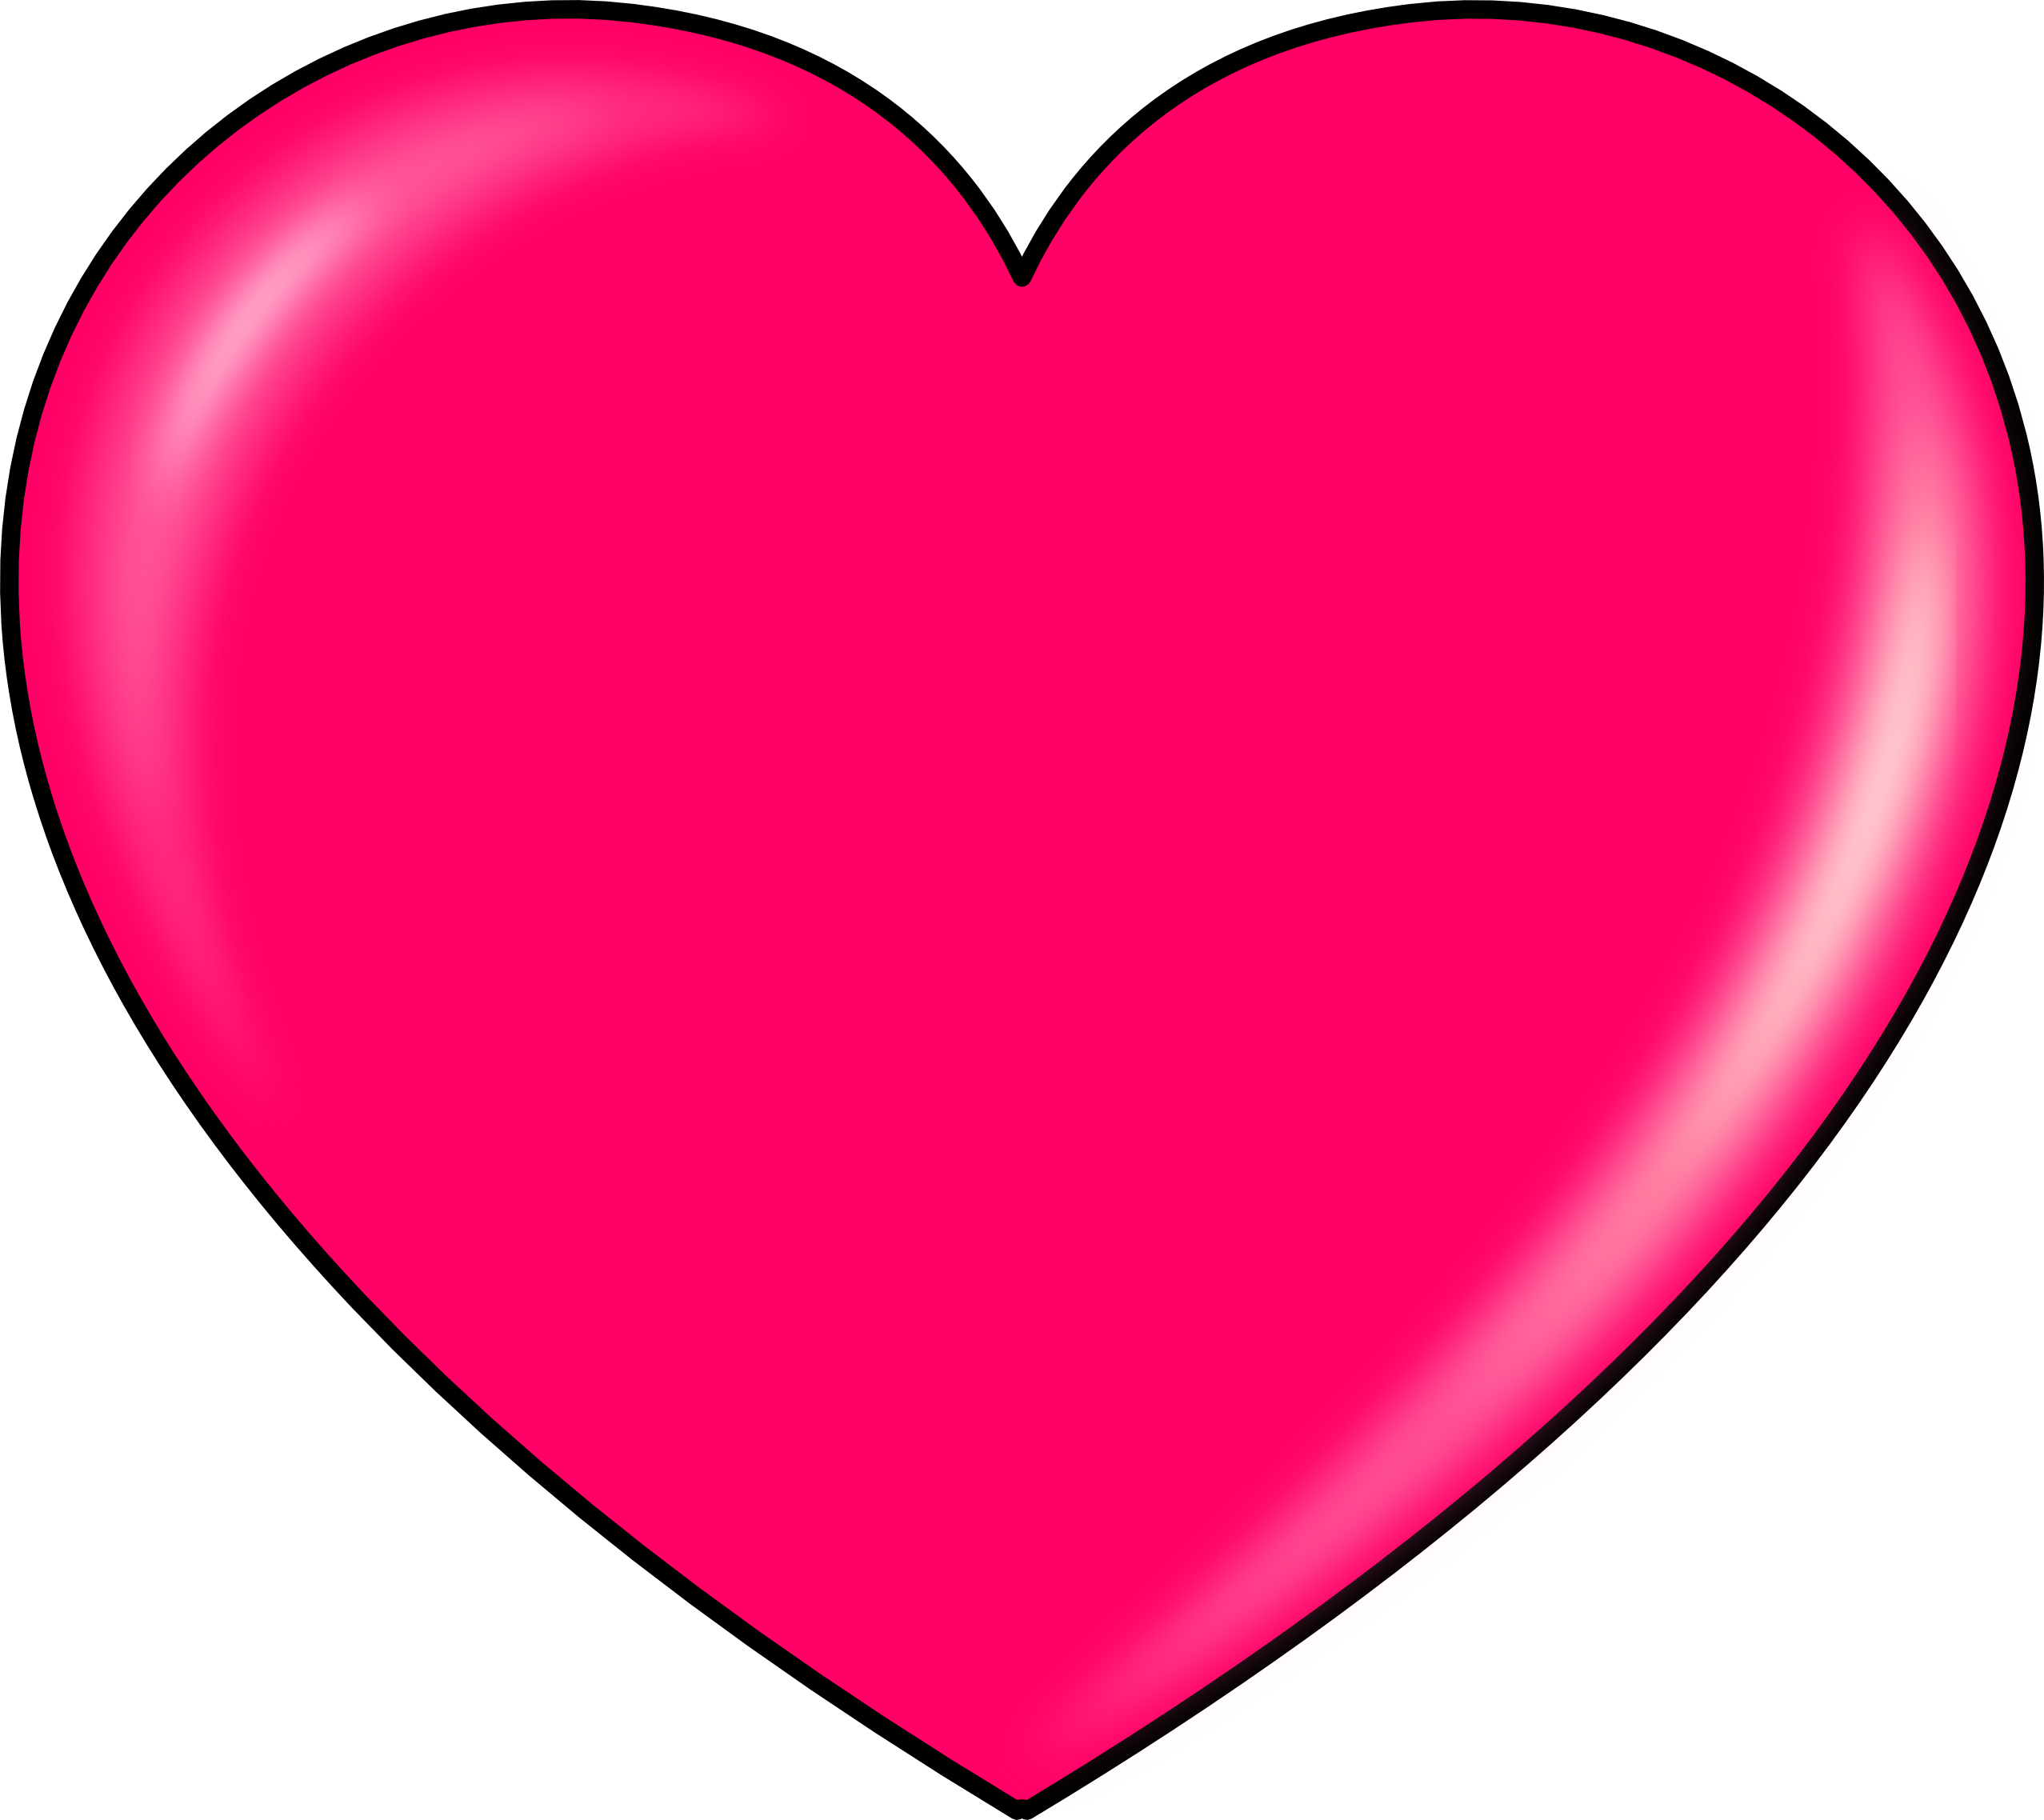 Dark Red Heart PNG HD